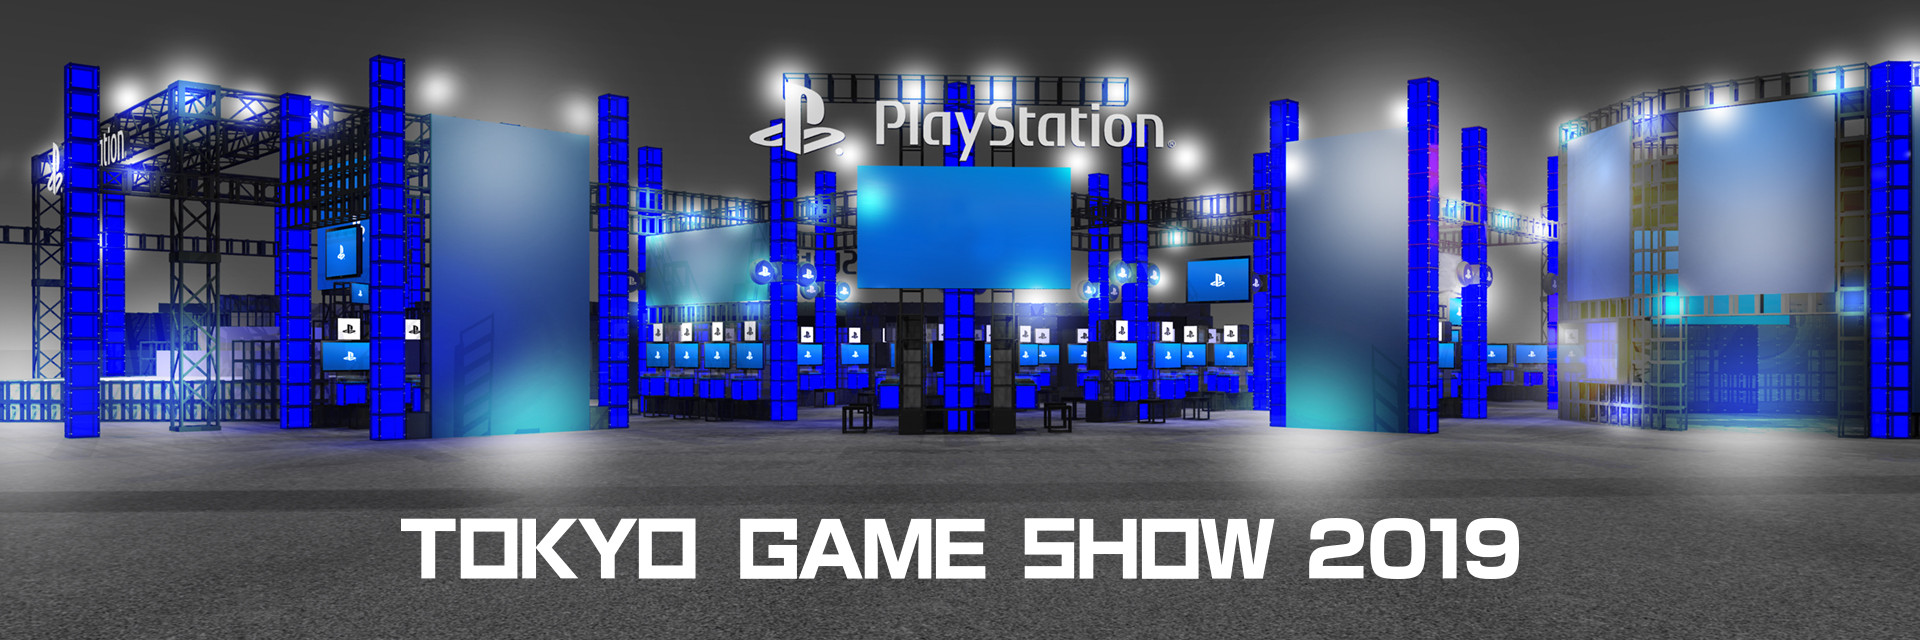 Sony Tokyo Game Show 2019